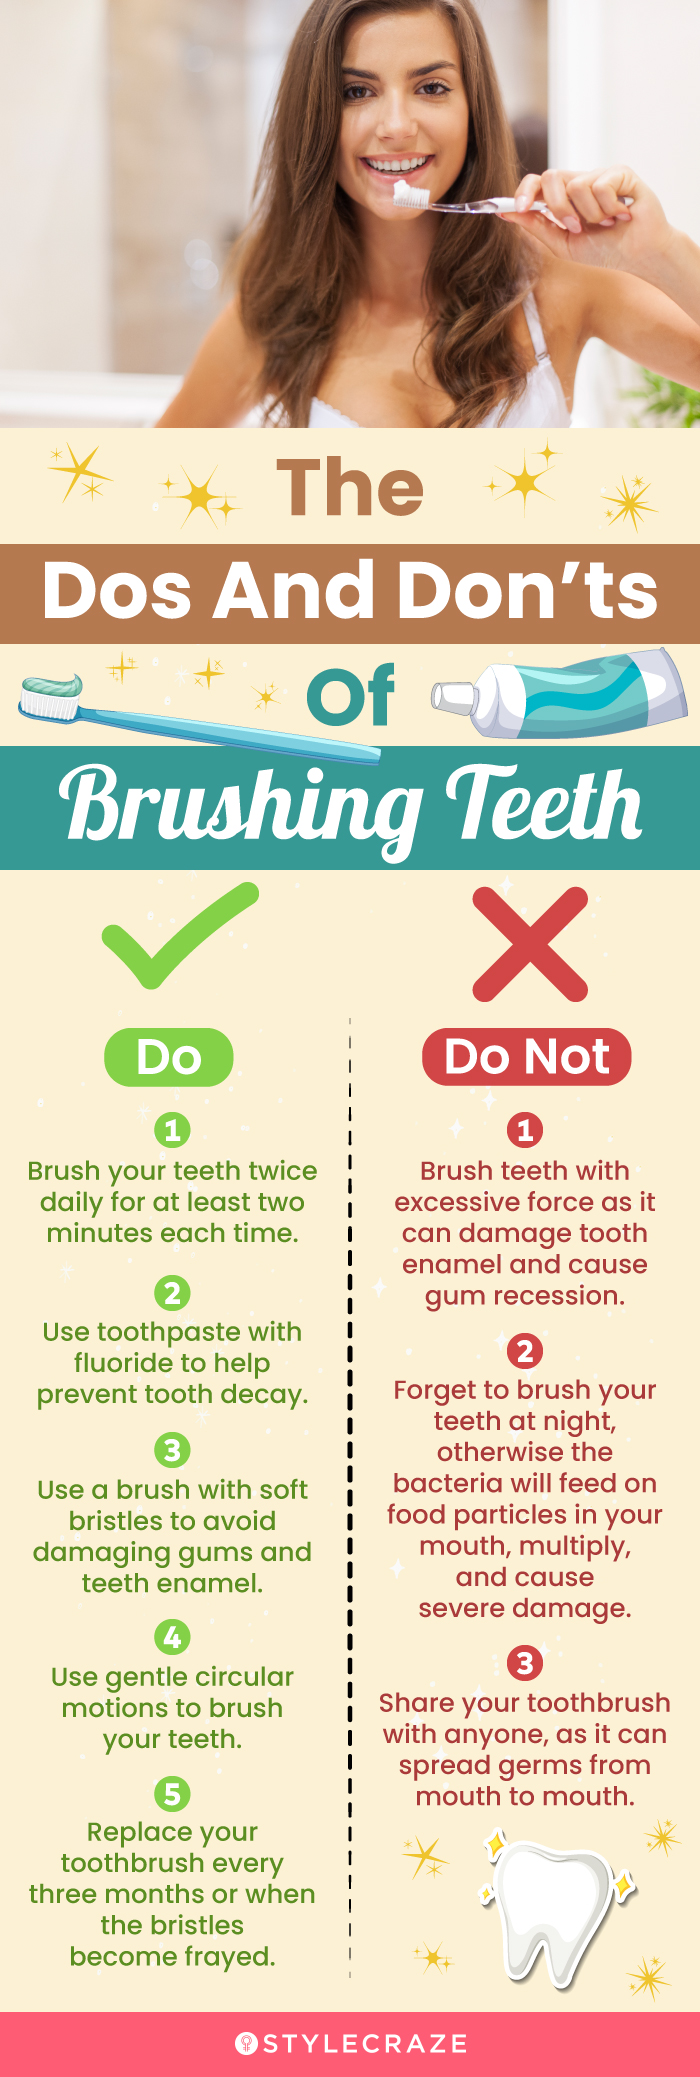 The Dos And Don’ts Of Brushing Teeth (infographic)